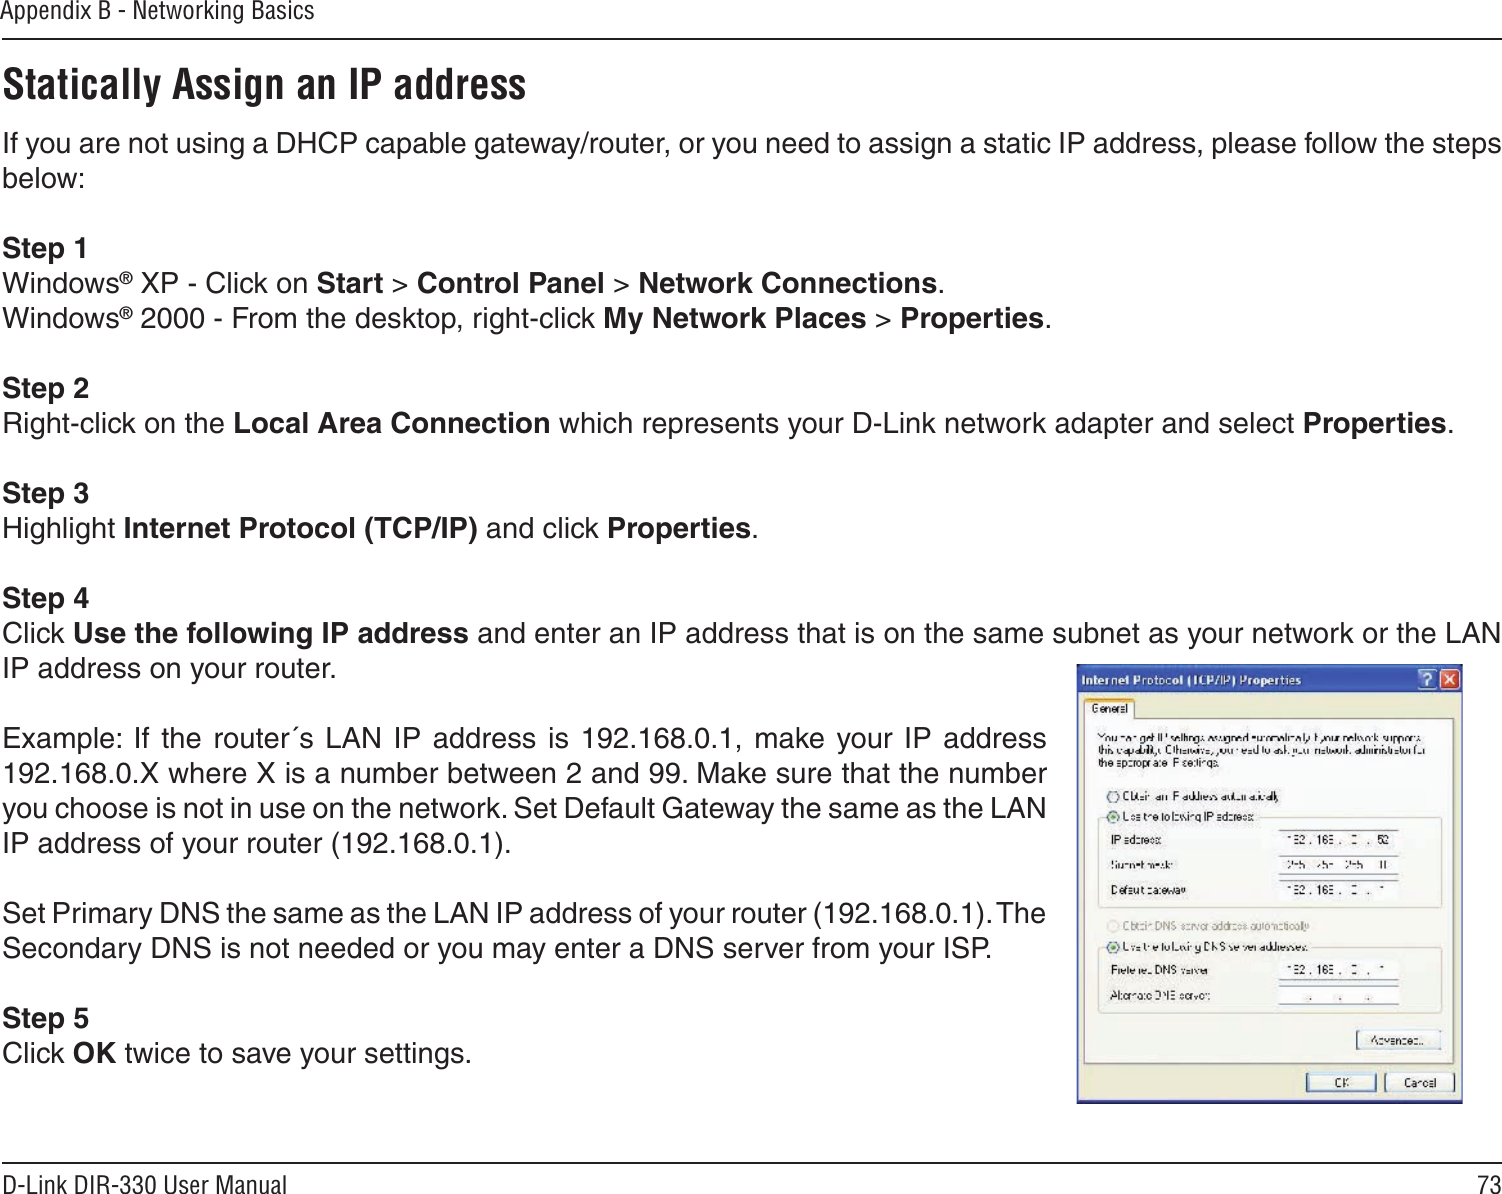 73D-Link DIR-330 User ManualAppendix B - Networking BasicsStatically Assign an IP addressIf you are not using a DHCP capable gateway/router, or you need to assign a static IP address, please follow the steps below:Step 1Windows® XP - Click on Start &gt; Control Panel &gt; Network Connections.Windows® 2000 - From the desktop, right-click My Network Places &gt; Properties.Step 2Right-click on the Local Area Connection which represents your D-Link network adapter and select Properties.Step 3Highlight Internet Protocol (TCP/IP) and click Properties.Step 4Click Use the following IP address and enter an IP address that is on the same subnet as your network or the LAN IP address on your router. Example: If  the  router´s  LAN  IP  address is 192.168.0.1, make  your IP  address 192.168.0.X where X is a number between 2 and 99. Make sure that the number you choose is not in use on the network. Set Default Gateway the same as the LAN IP address of your router (192.168.0.1). Set Primary DNS the same as the LAN IP address of your router (192.168.0.1). The Secondary DNS is not needed or you may enter a DNS server from your ISP.Step 5Click OK twice to save your settings.